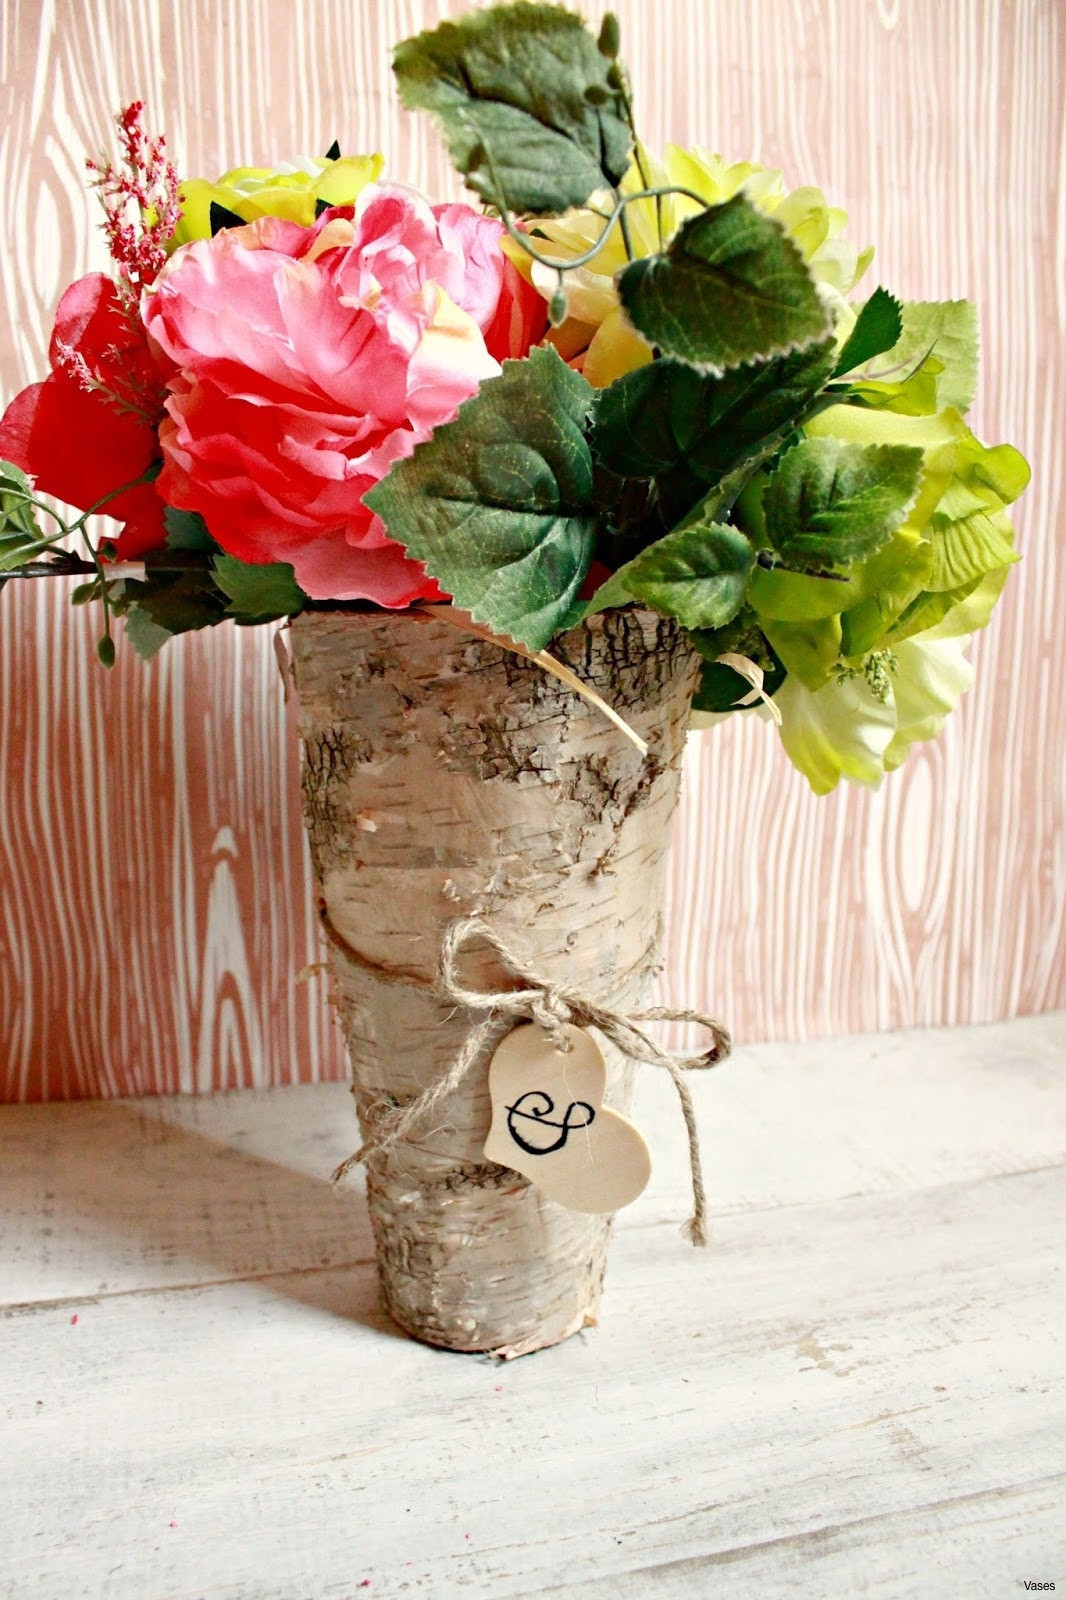 25 Awesome Tall Metal Vases 2024 free download tall metal vases of wooden wall vase new tall vase centerpiece ideas vases flowers in intended for wooden wall vase beautiful wooden wedding flowers h vases diy wood vase i 0d base turntable